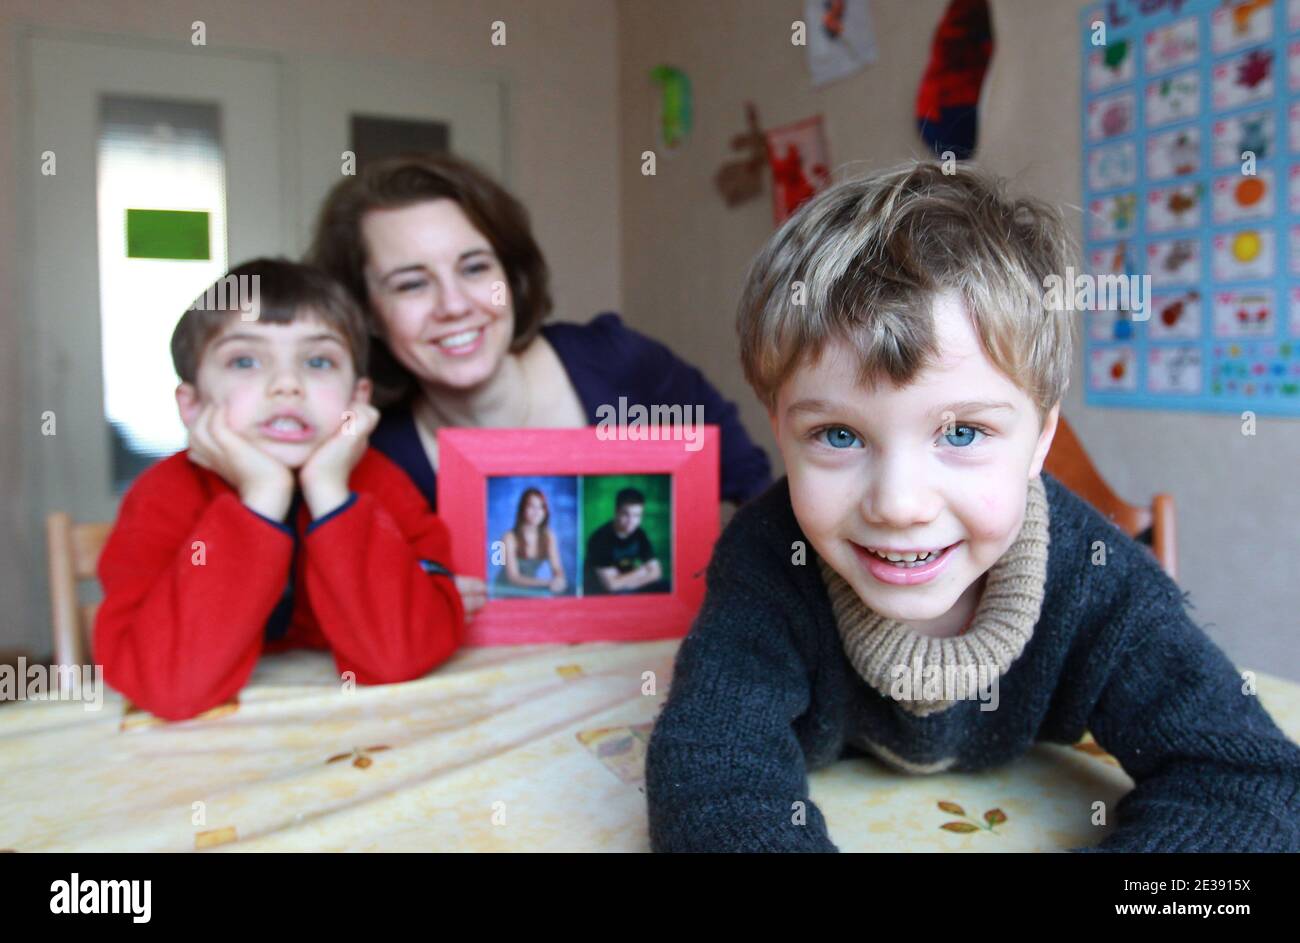 EXCLUSIVE. Nathalie Gettliffe poses with her two sons Jean-Philippe (L) and  Martin Gruzelle while holding a photograph of Josephine and Maximilien, her  children living in Canada, at her home in Strasbourg, eastern